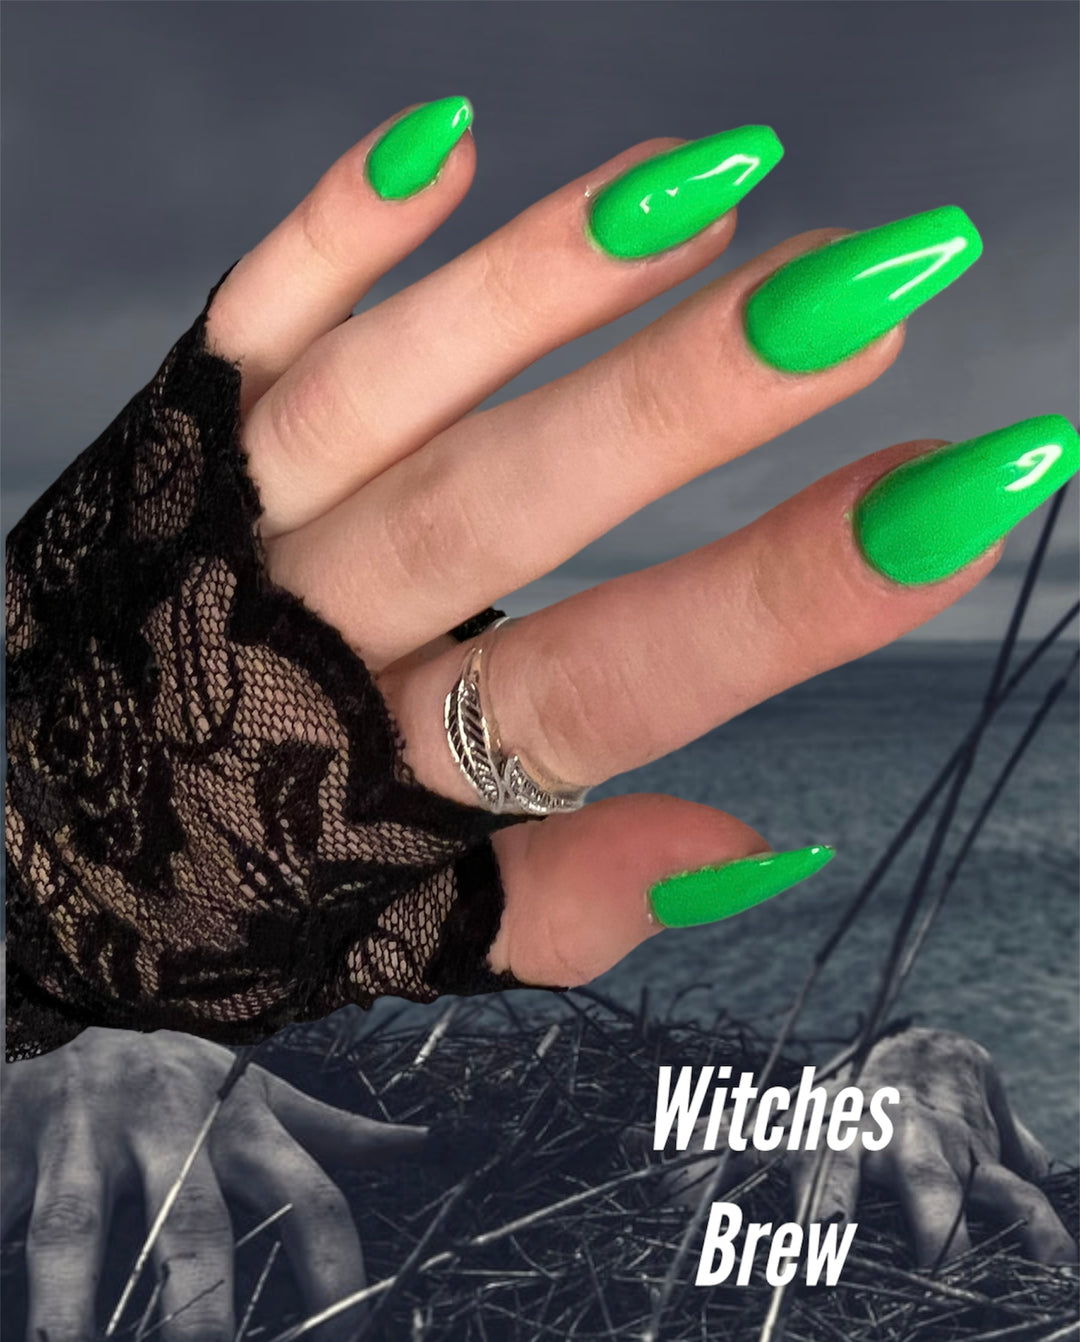 Witches Brew- Gel Polish- Limited Edition Queendianna27